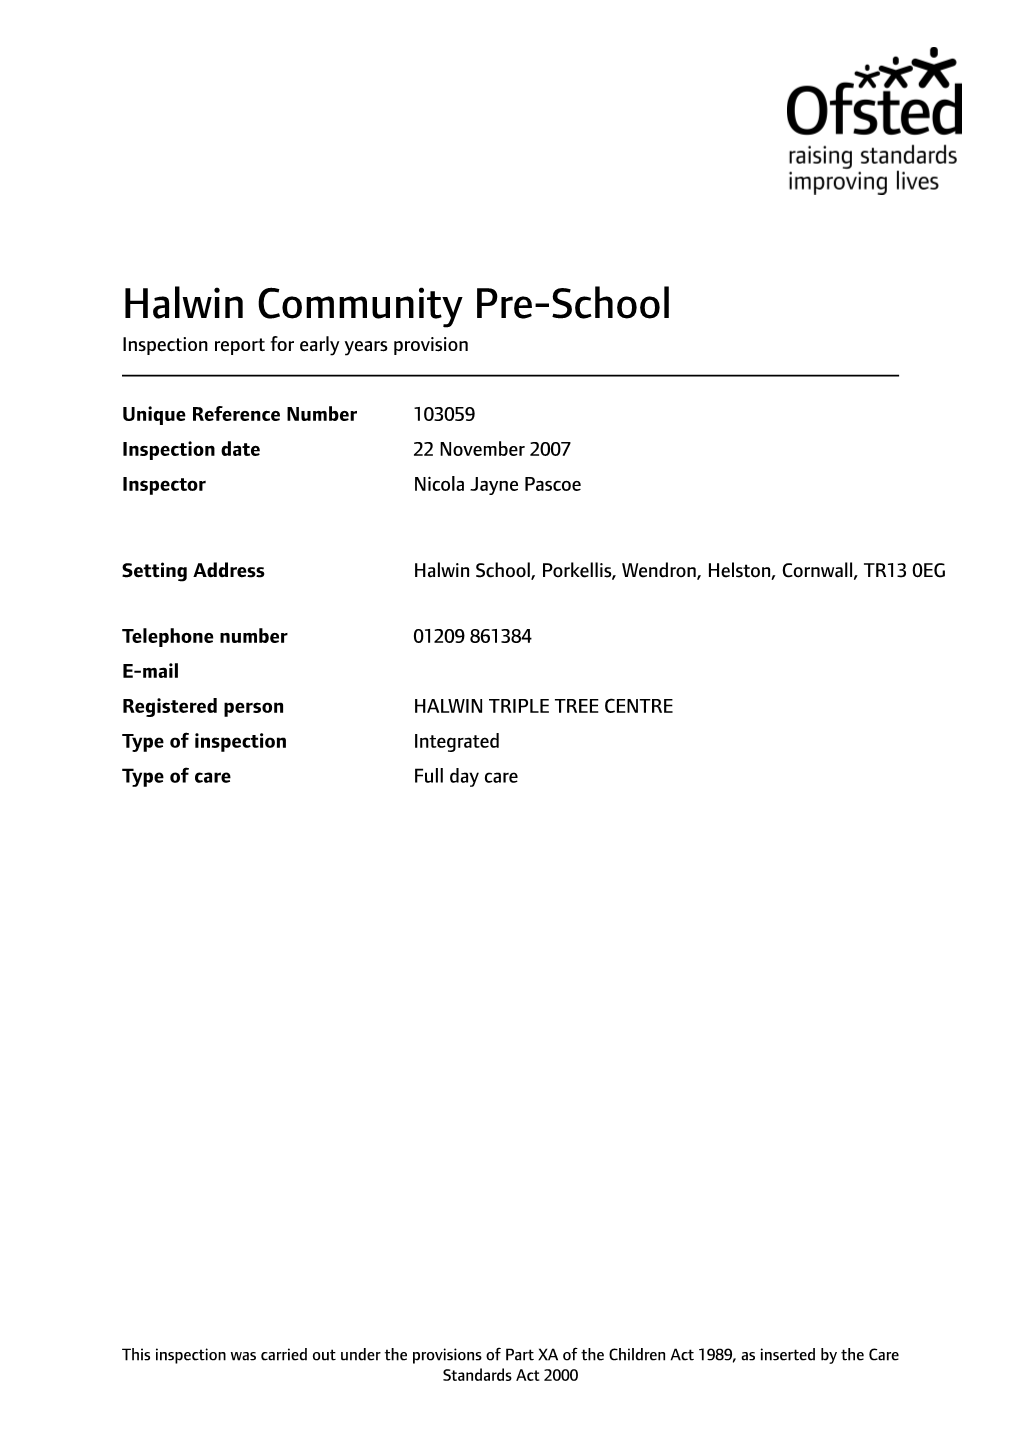 Halwin Community Pre-School Inspection Report for Early Years Provision